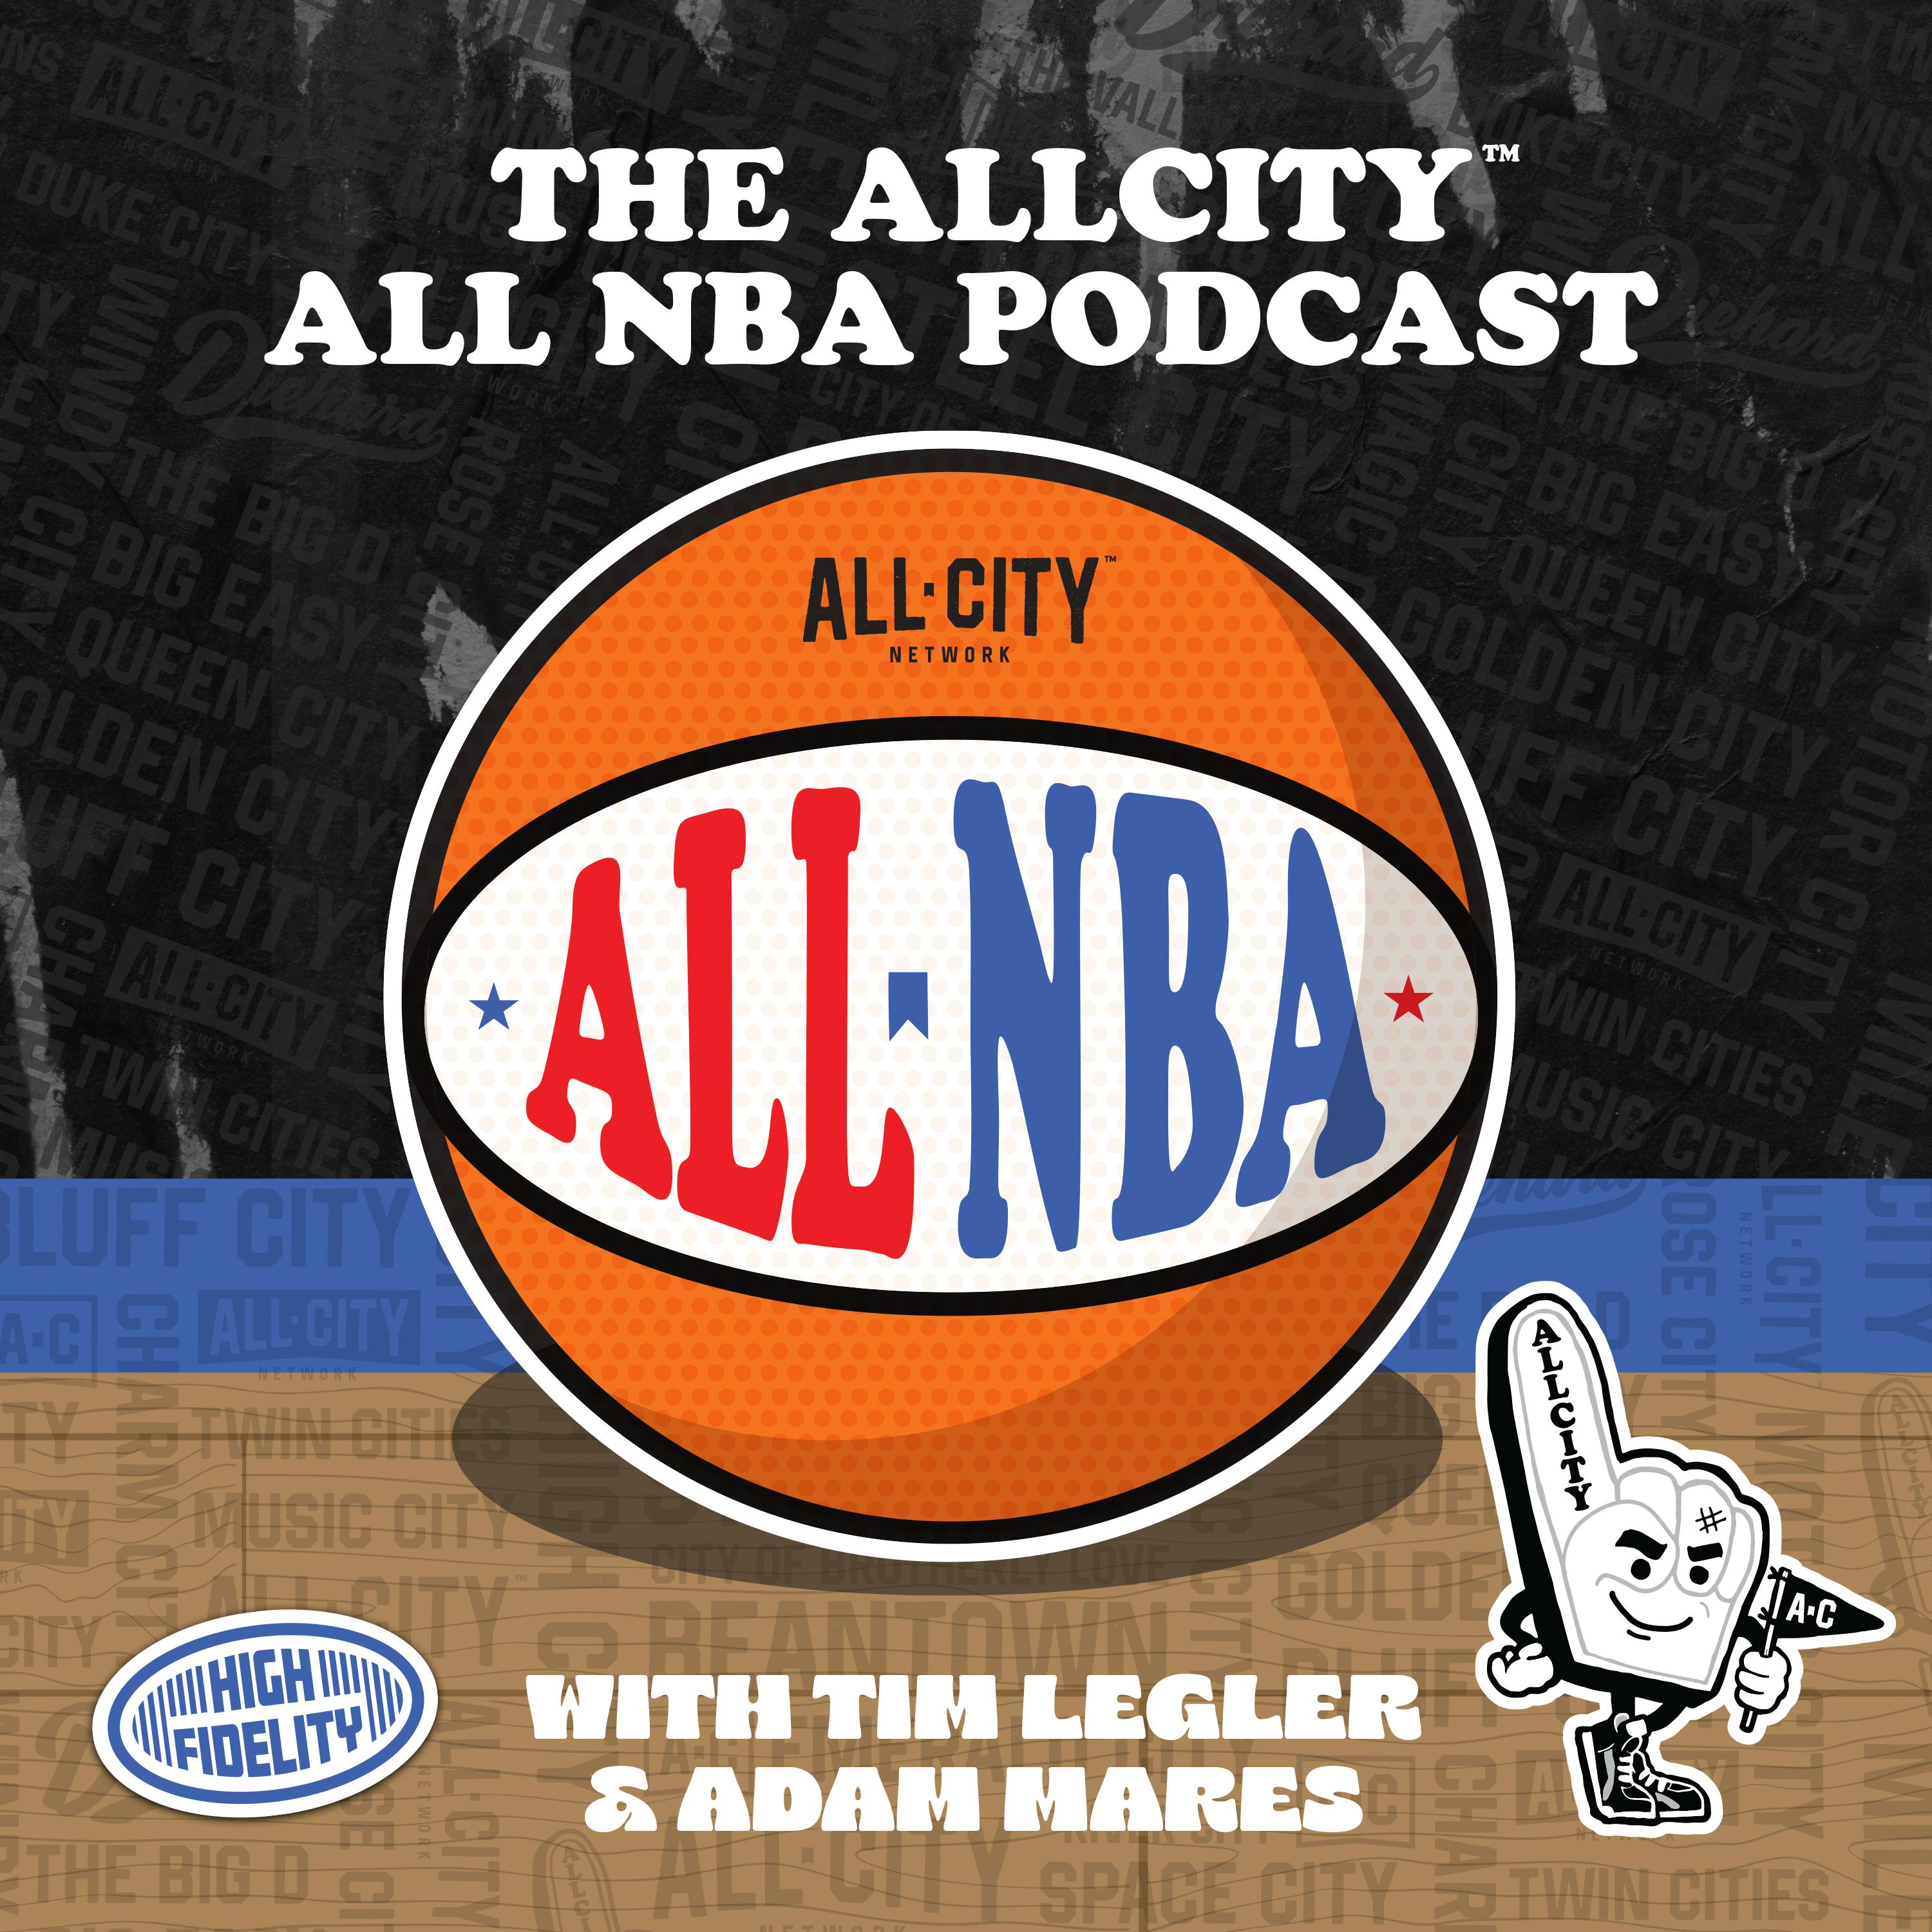 The ALL NBA Podcast: Which NBA team has the easiest path to the Finals?